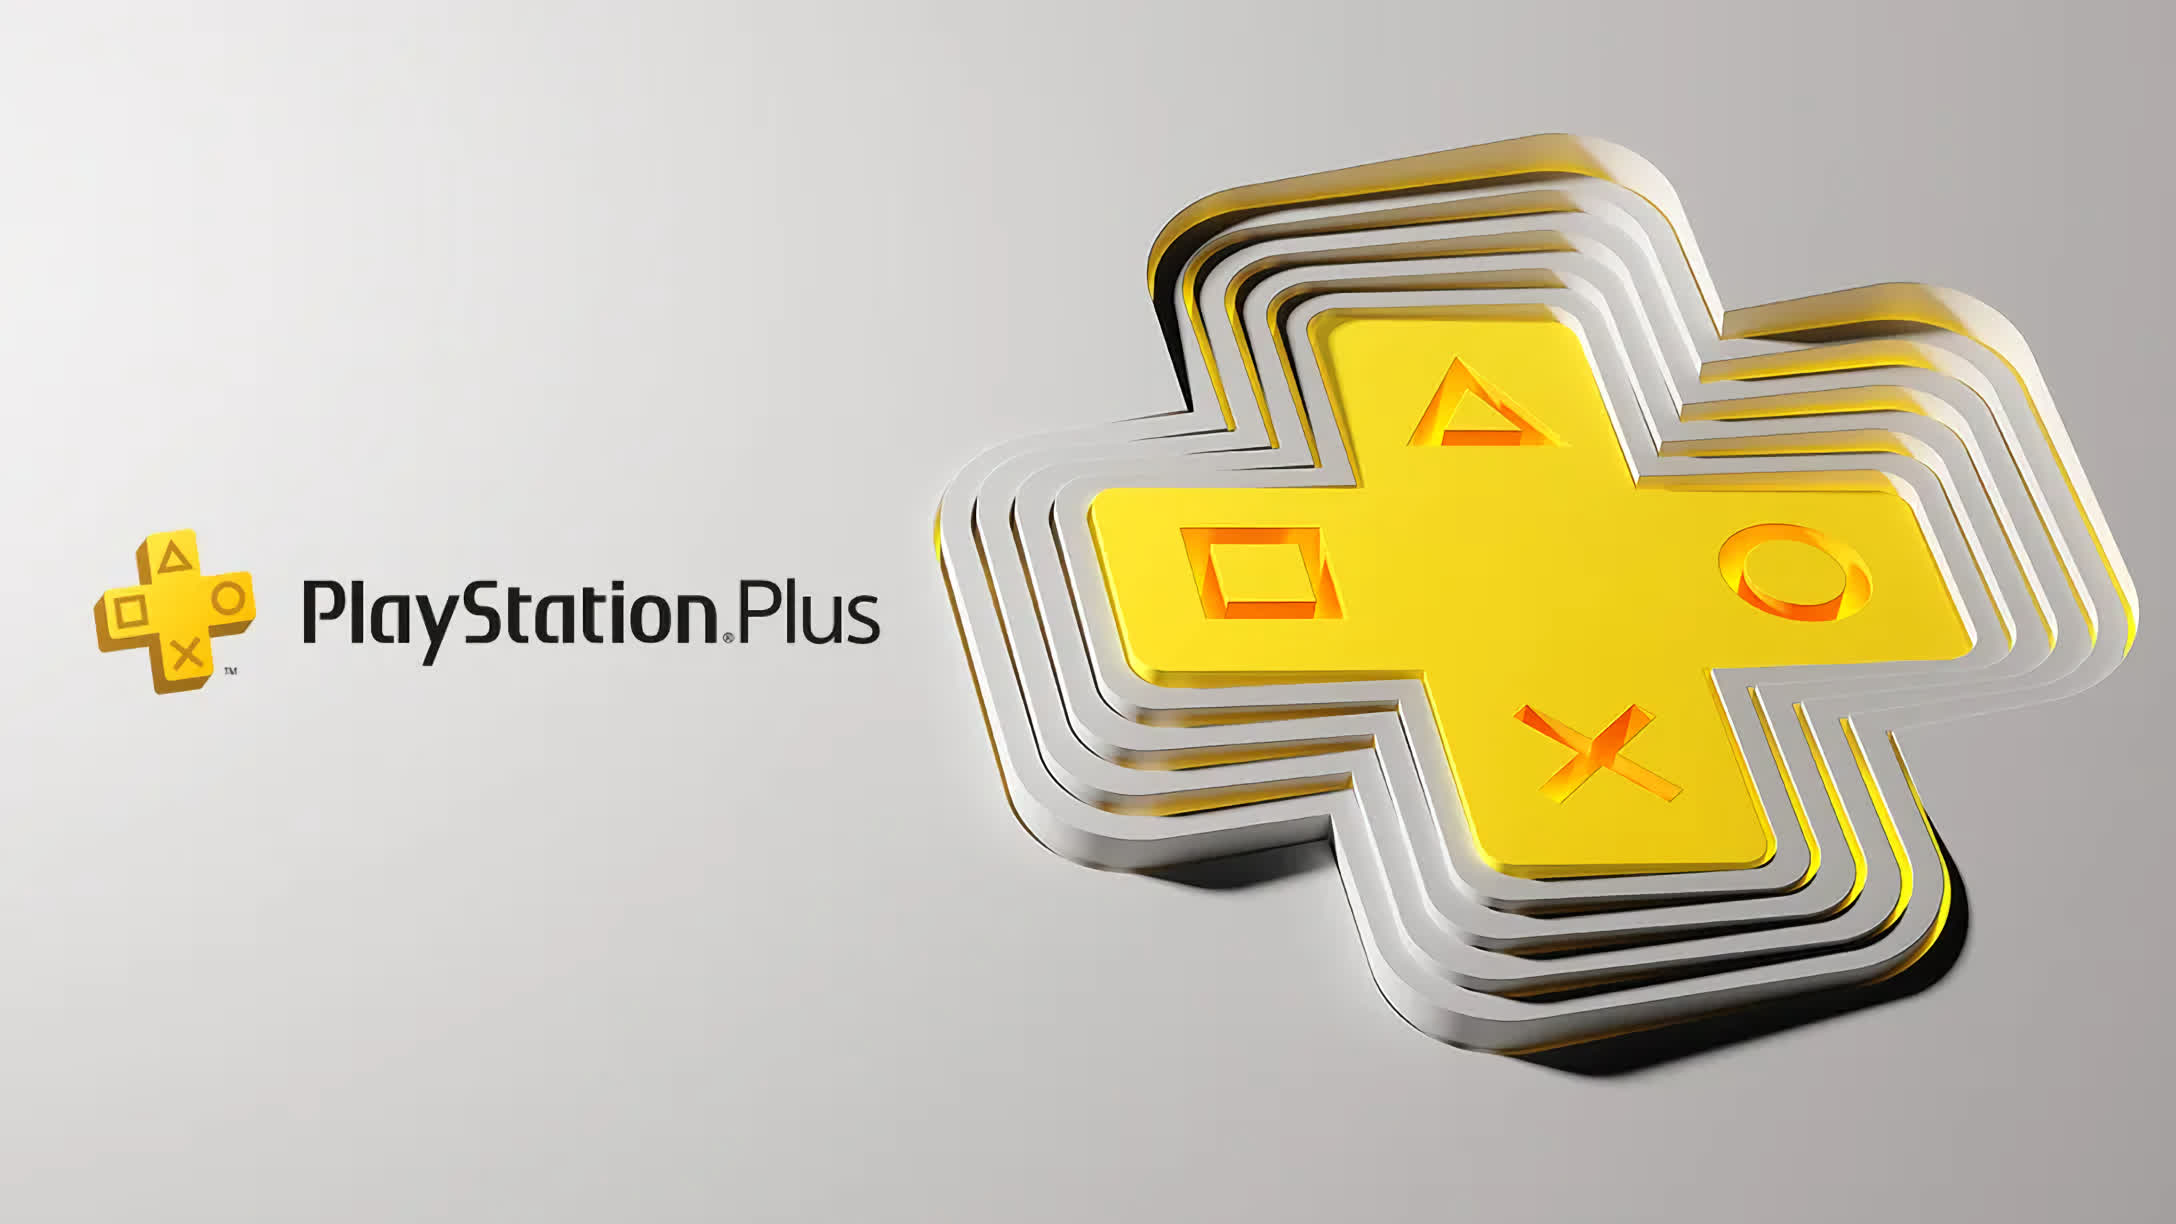 Sony might bear the brunt of creating PlayStation Plus game trials for developers